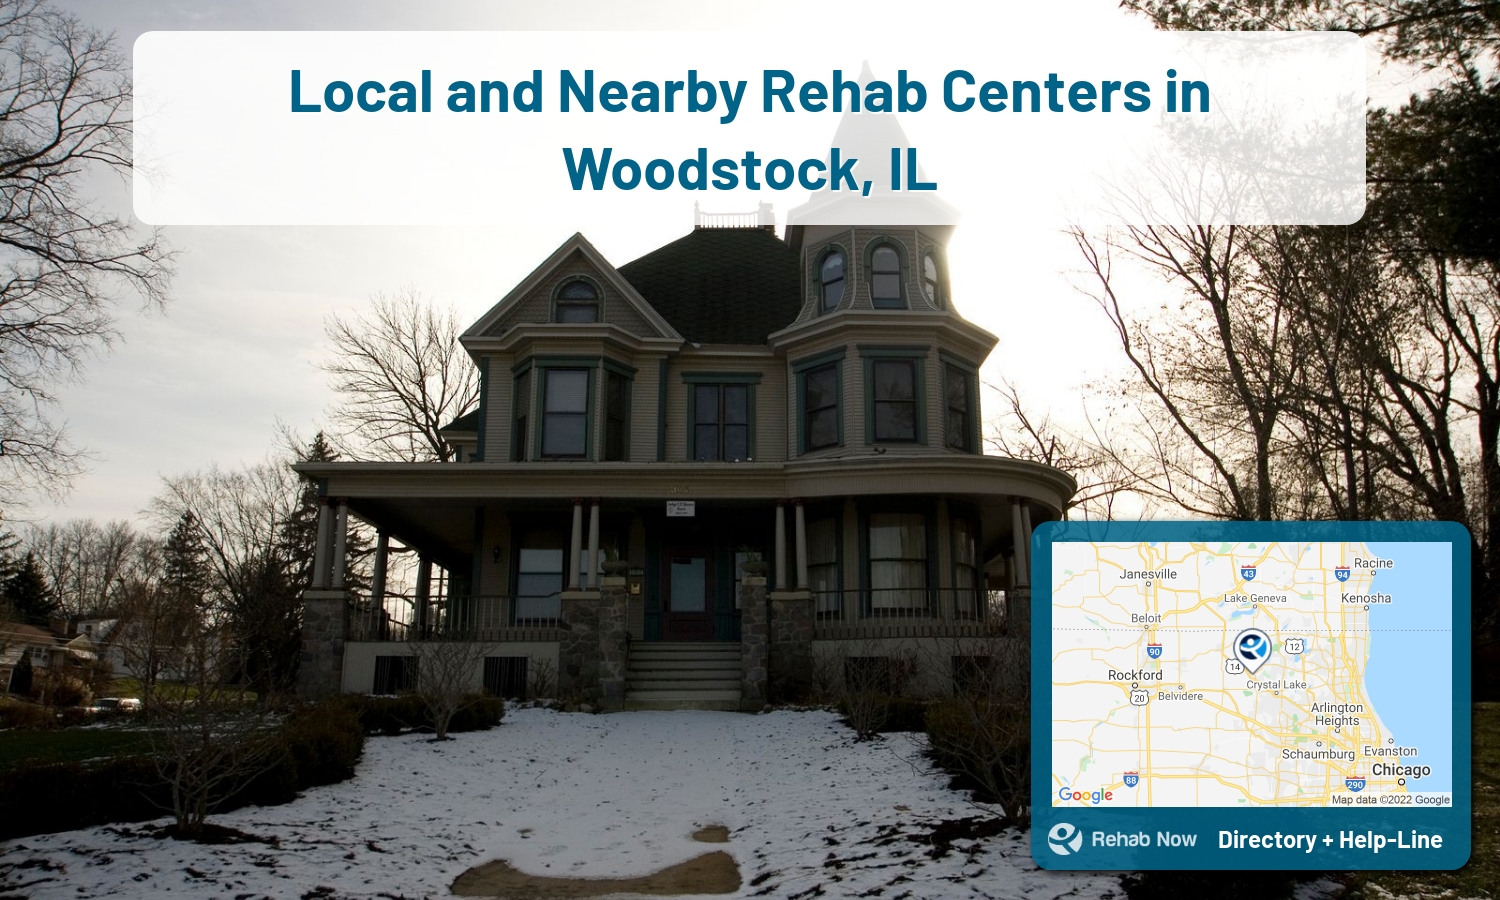 Woodstock, IL Treatment Centers. Find drug rehab in Woodstock, Illinois, or detox and treatment programs. Get the right help now!